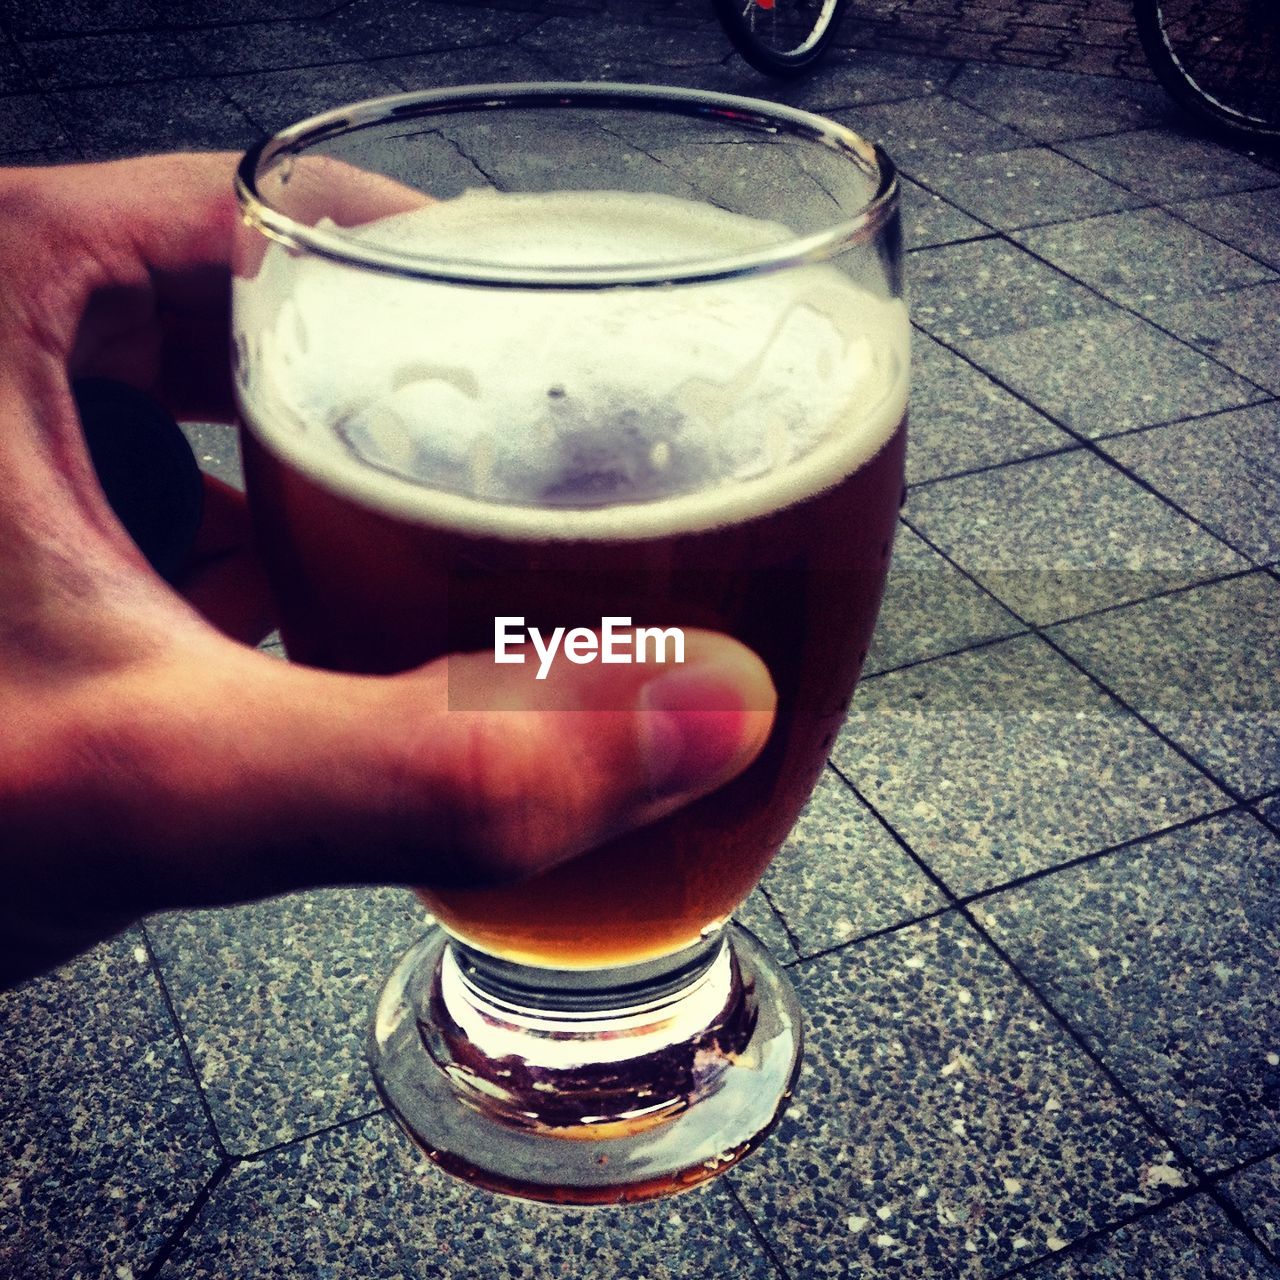 CLOSE-UP OF A HAND HOLDING BEER GLASS